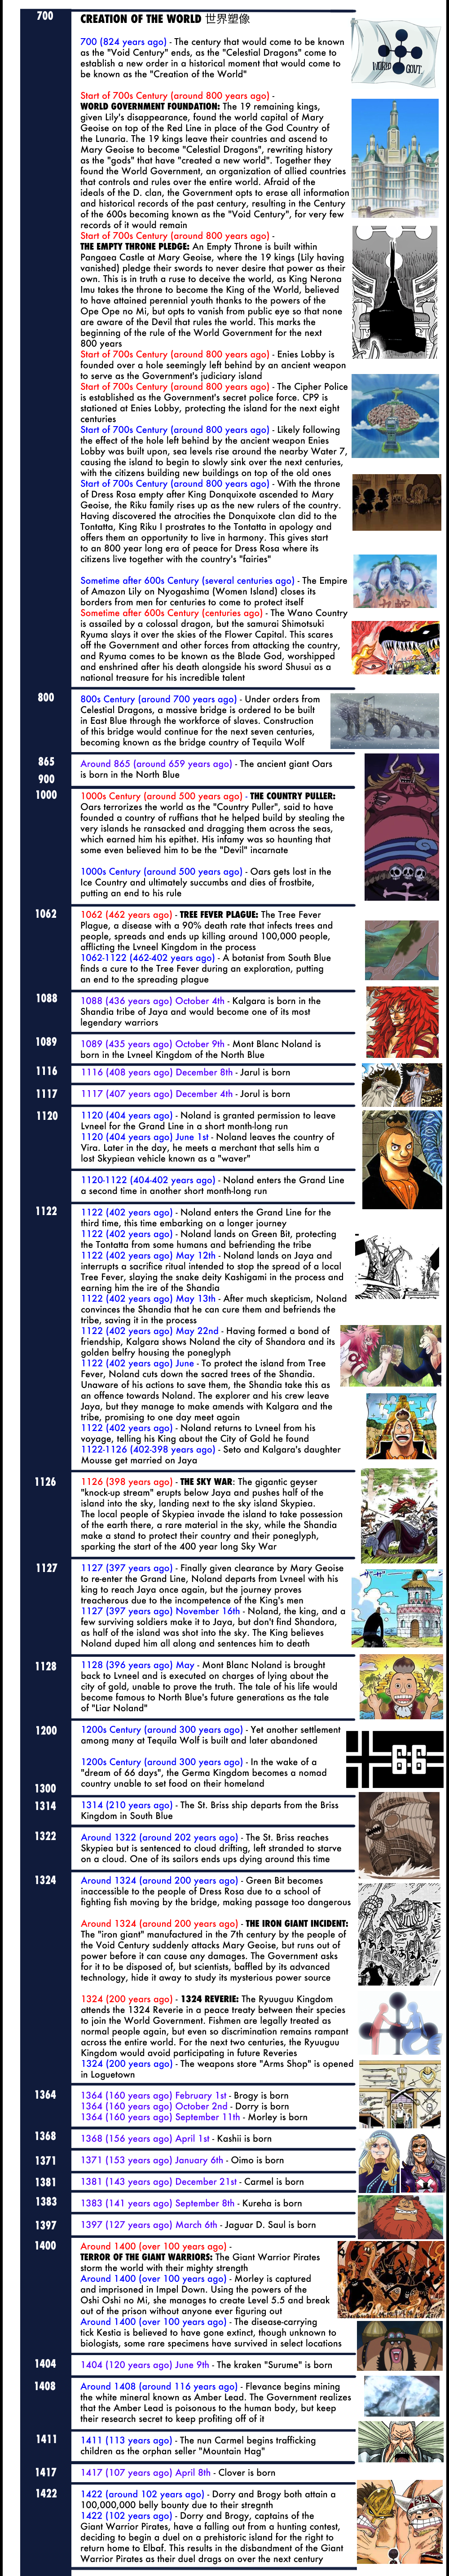 The One Piece Timeline – The Library of Ohara